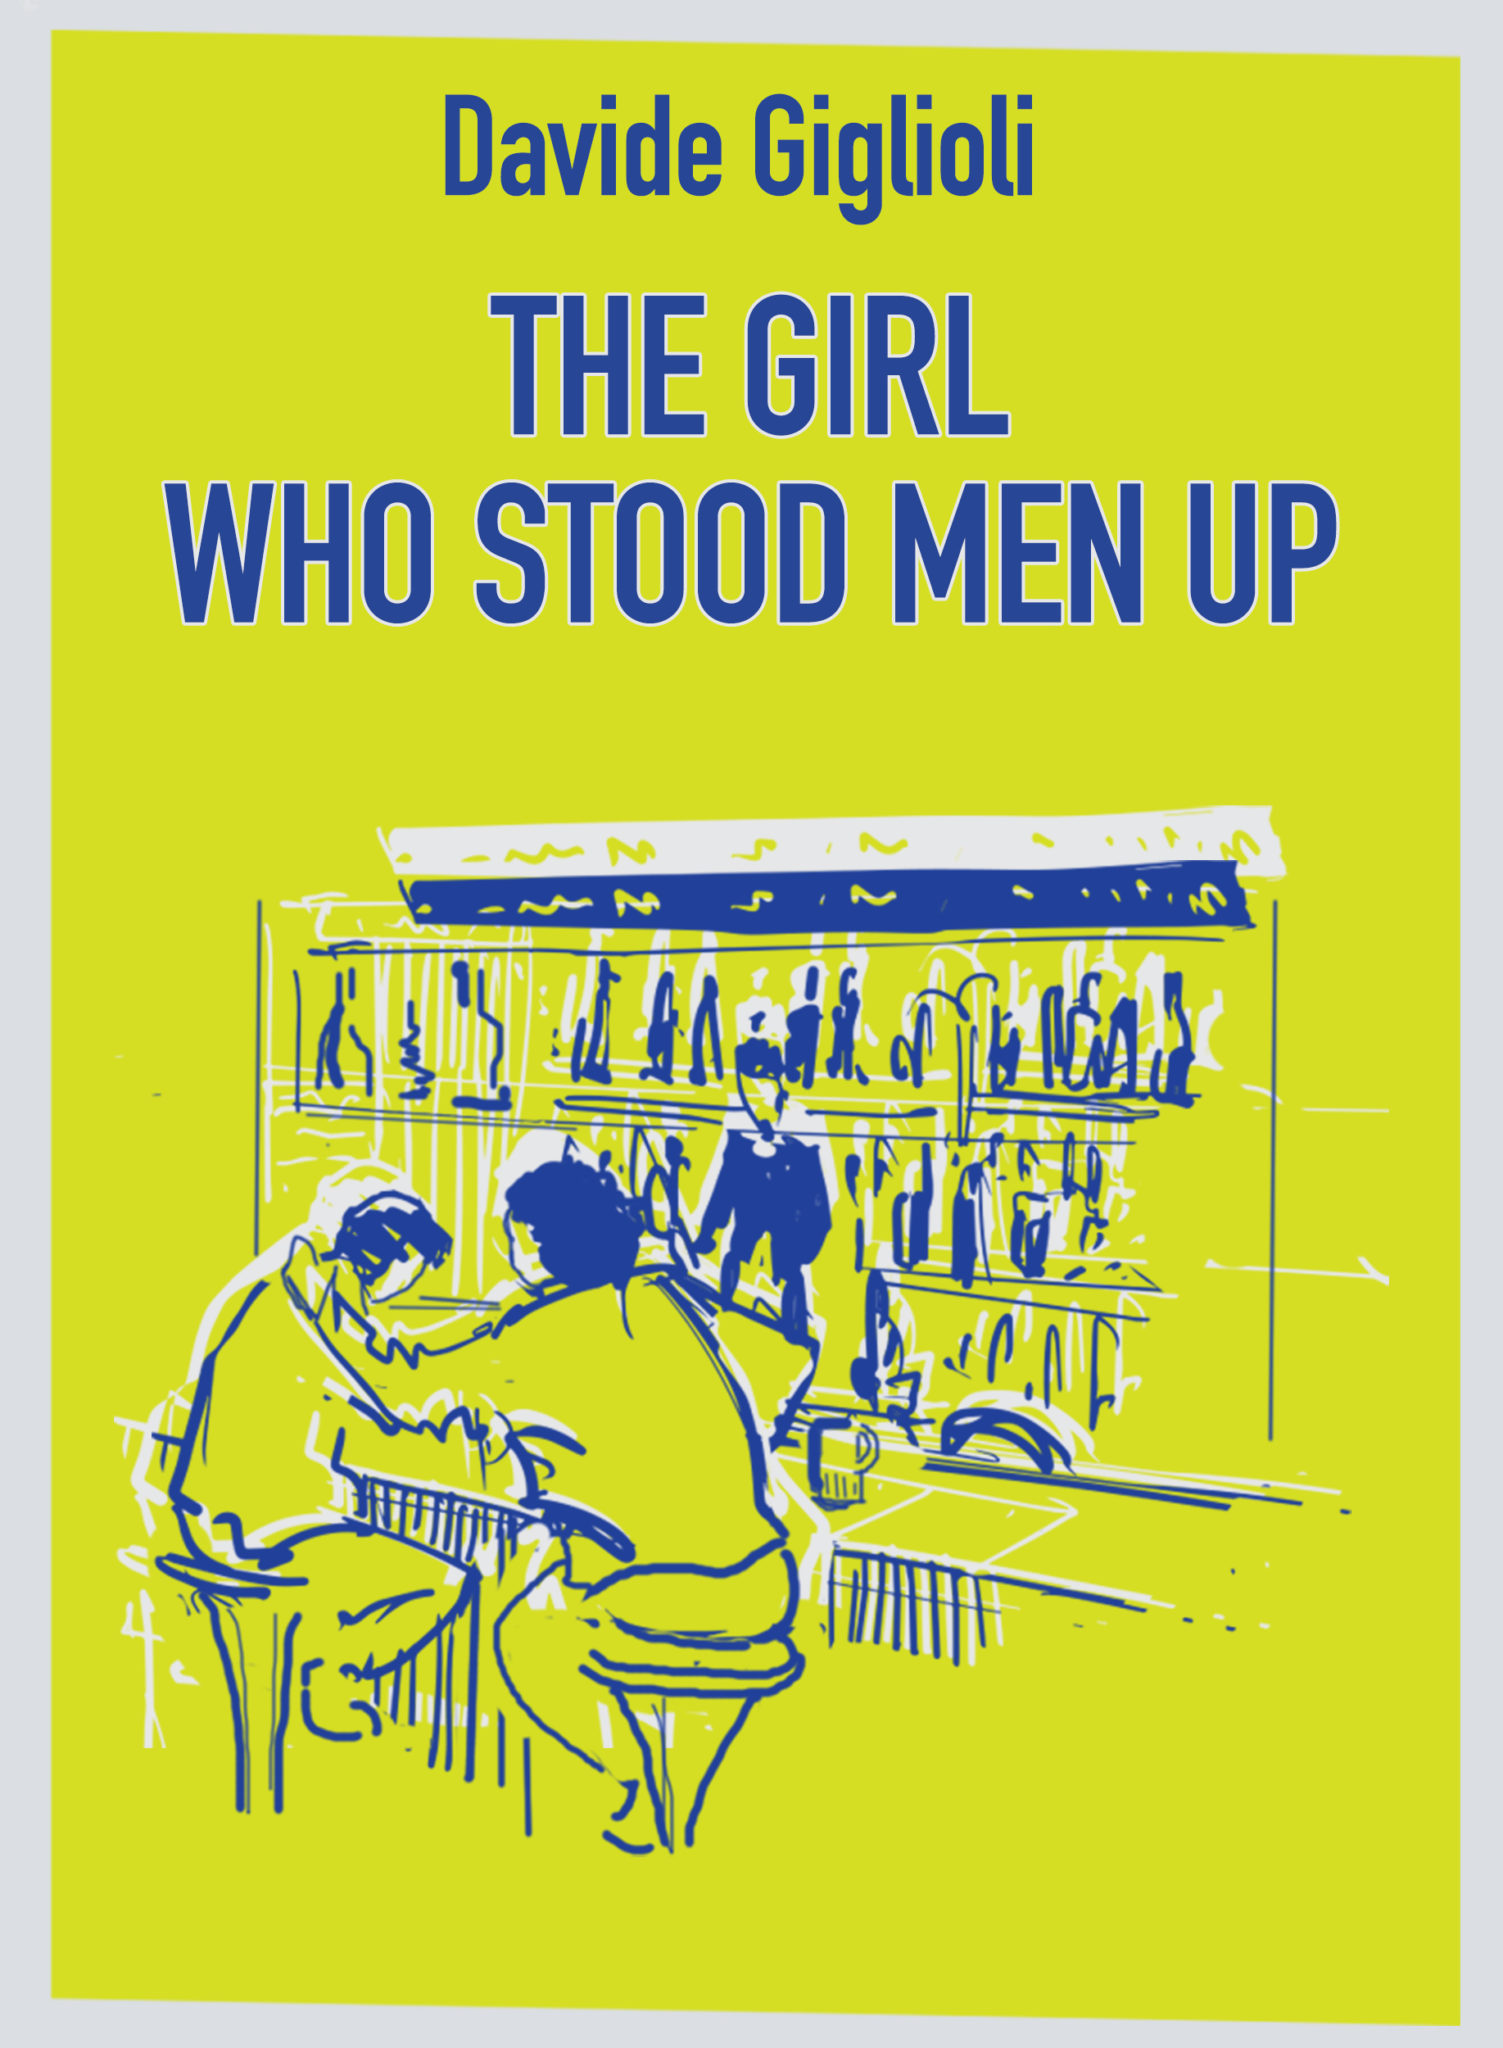 FREE: The girl who stood men up by Davide Giglioli